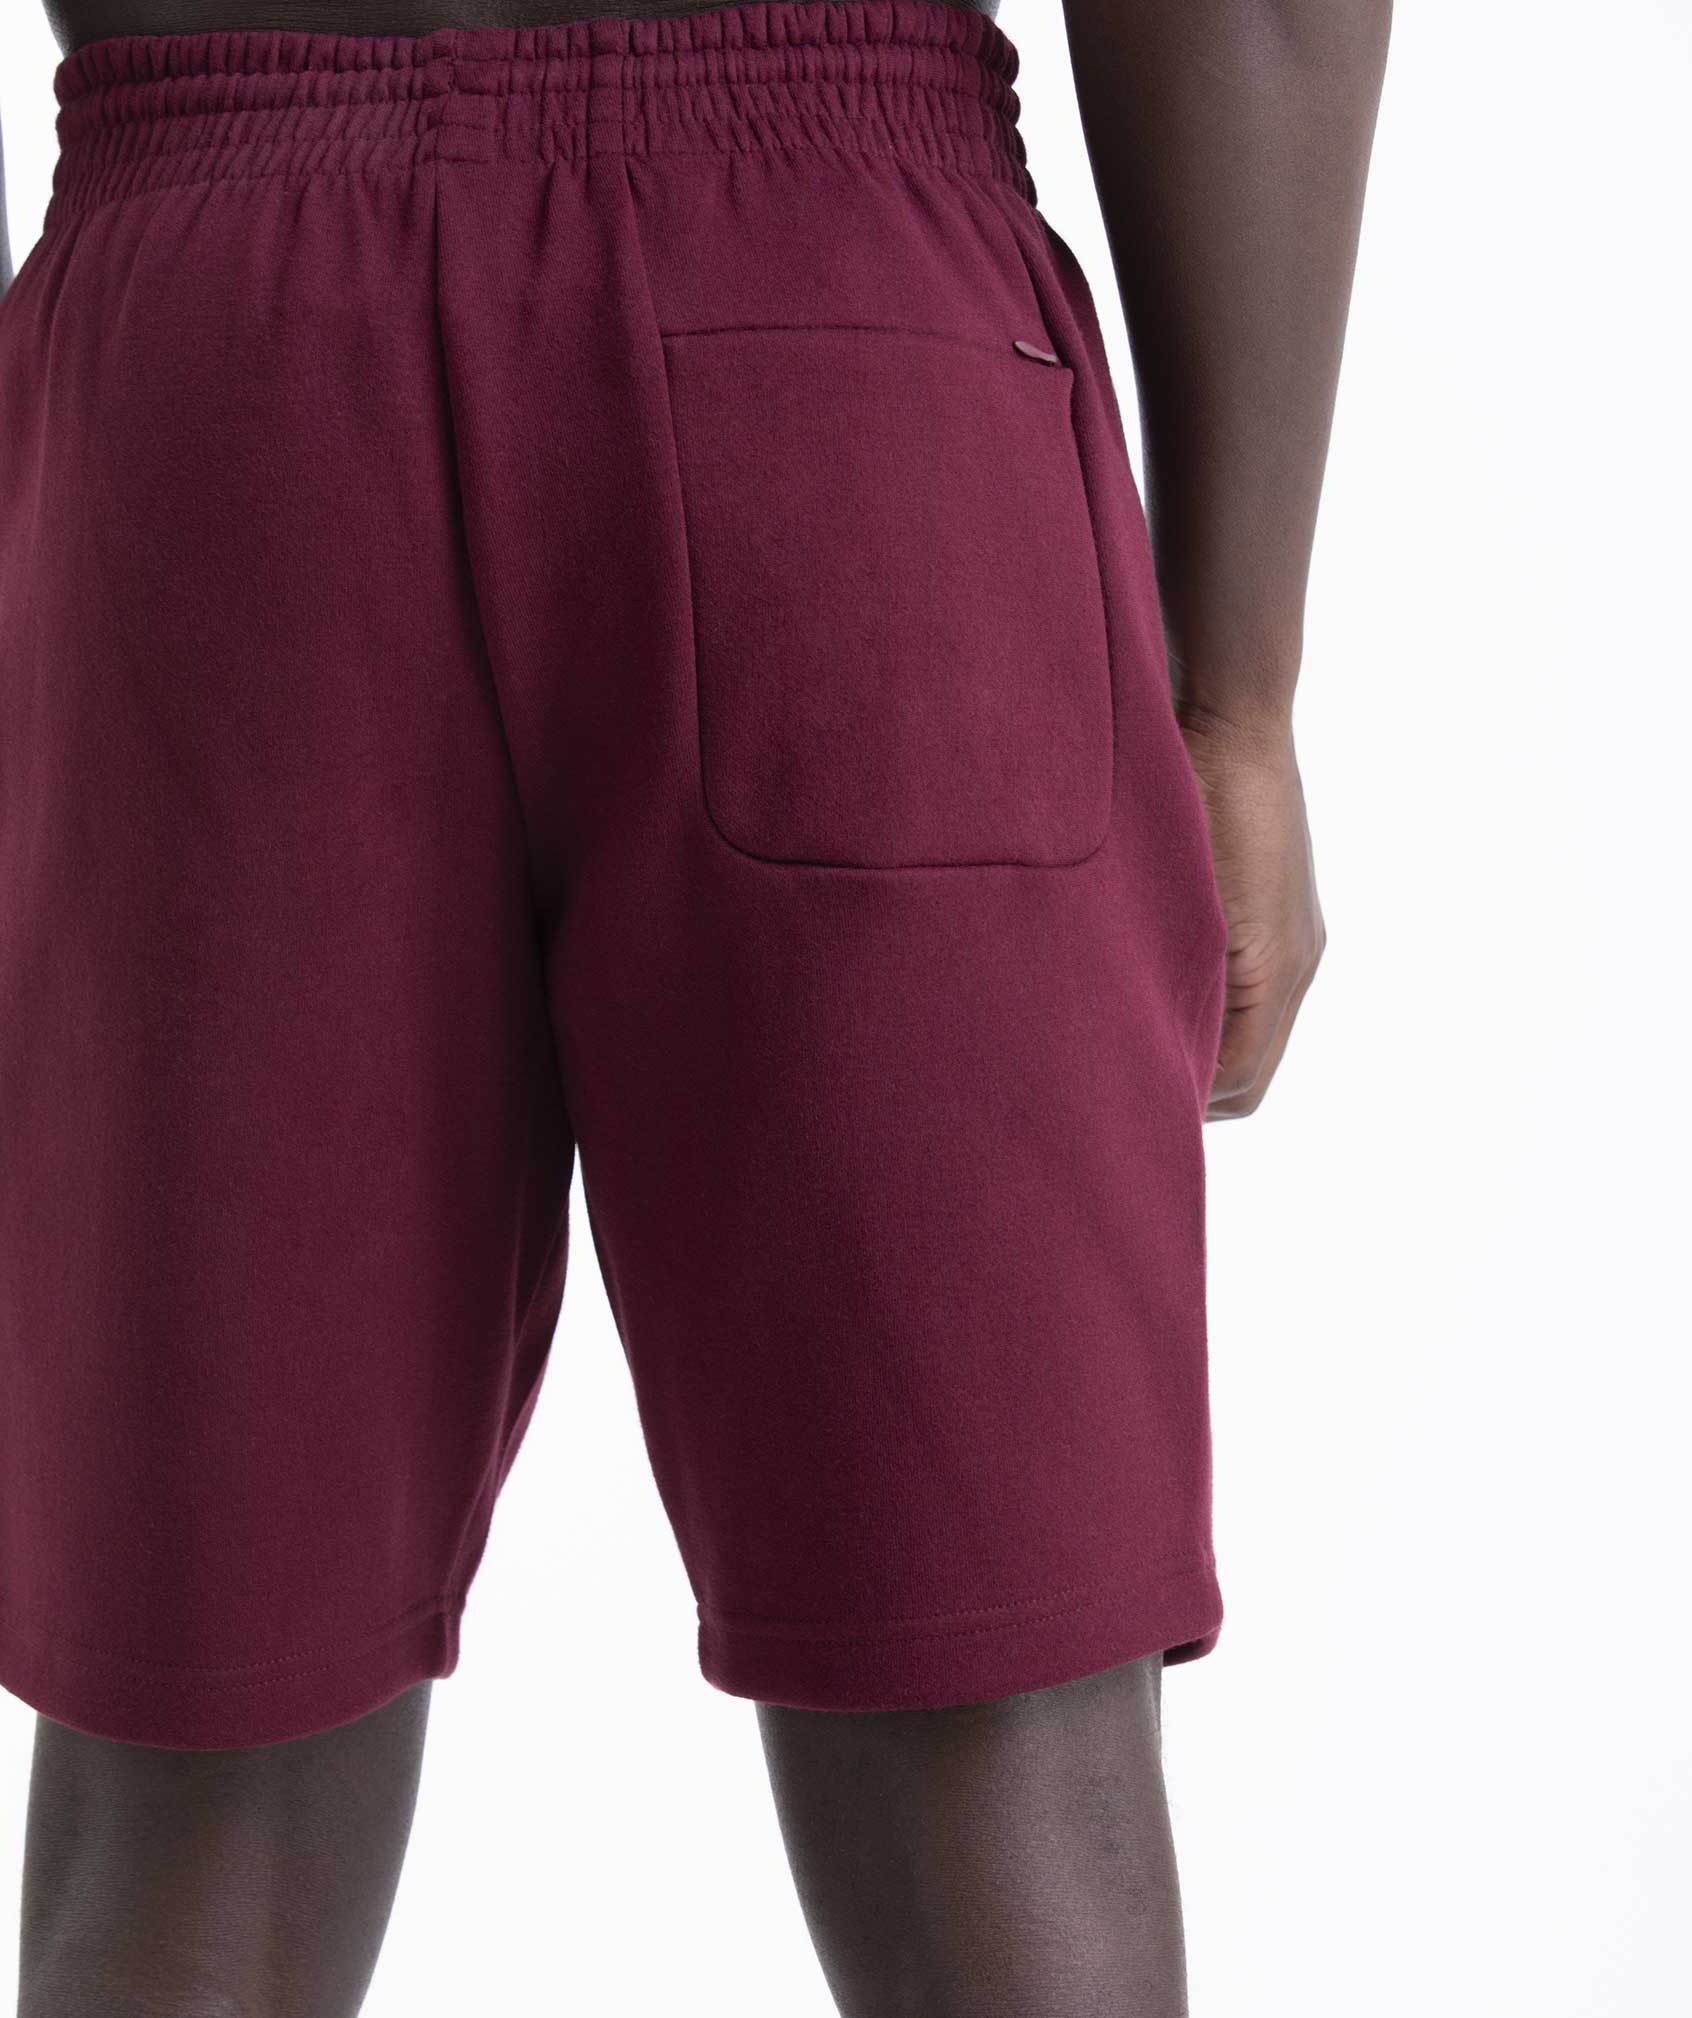 Ozone Shorts in Port - view 3